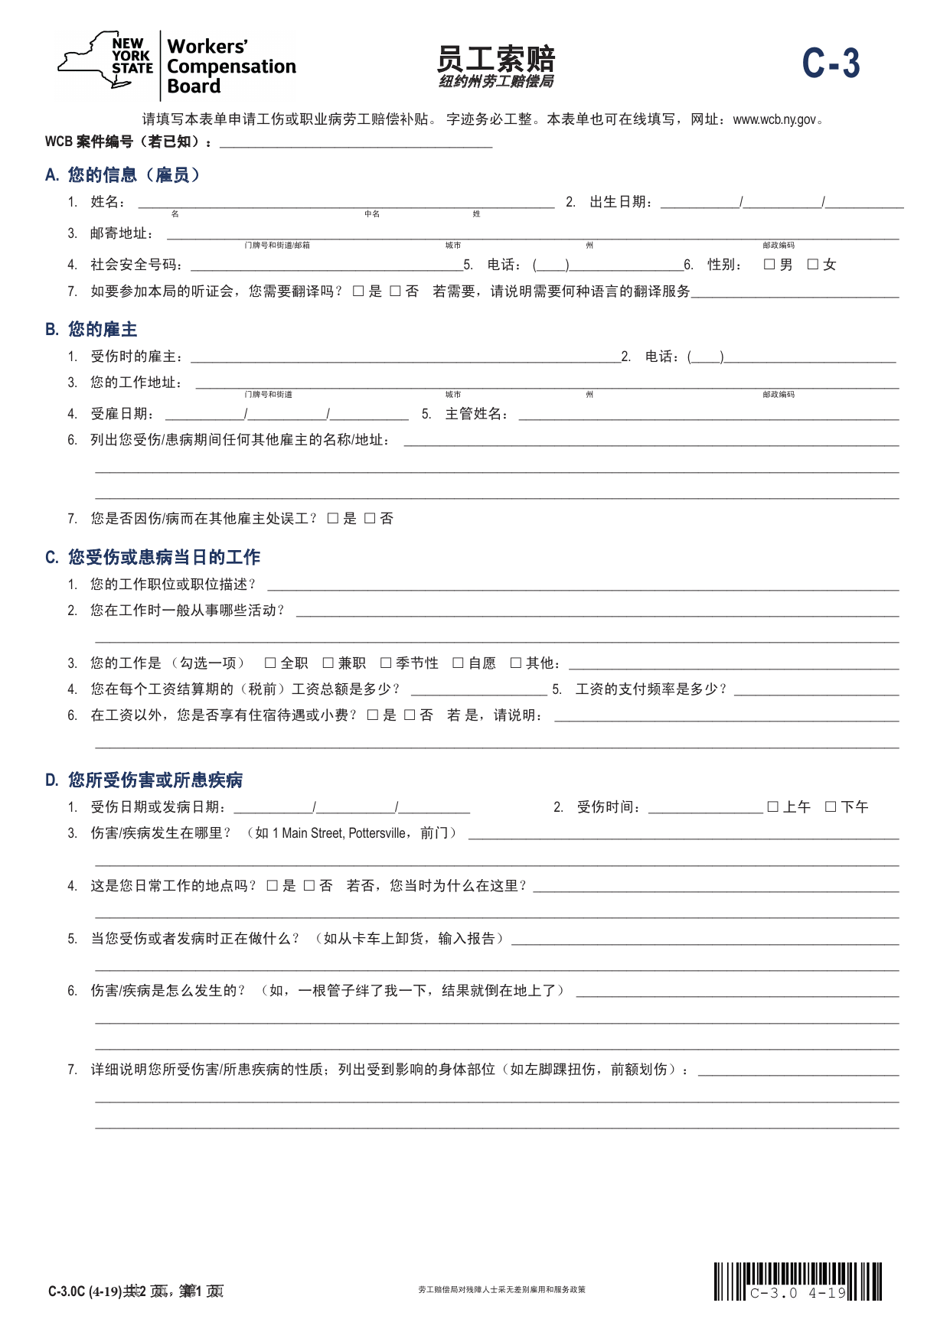 Form C-3C Employee Claim - New York (Chinese), Page 1